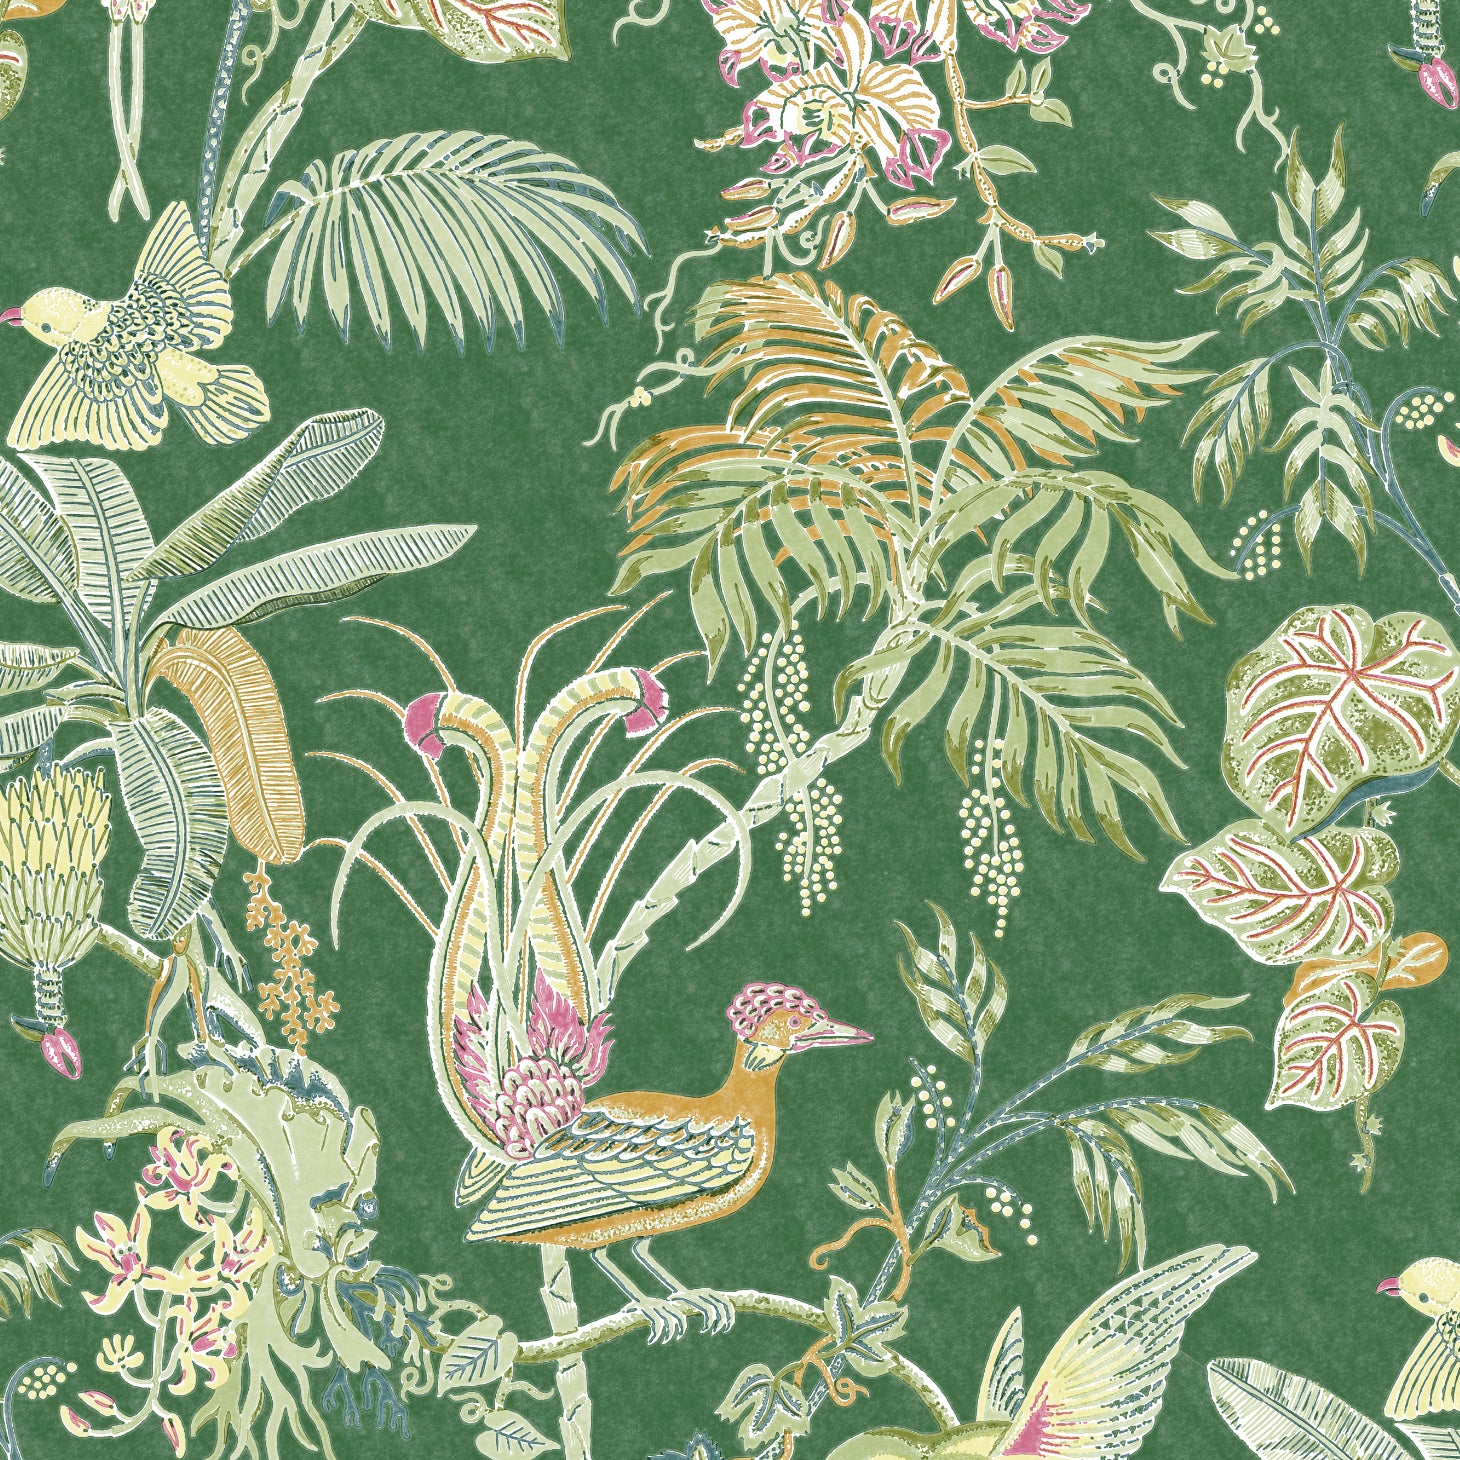 Detail of wallpaper in a dense bird and botanical print in shades of orange, pink and green on a green field.